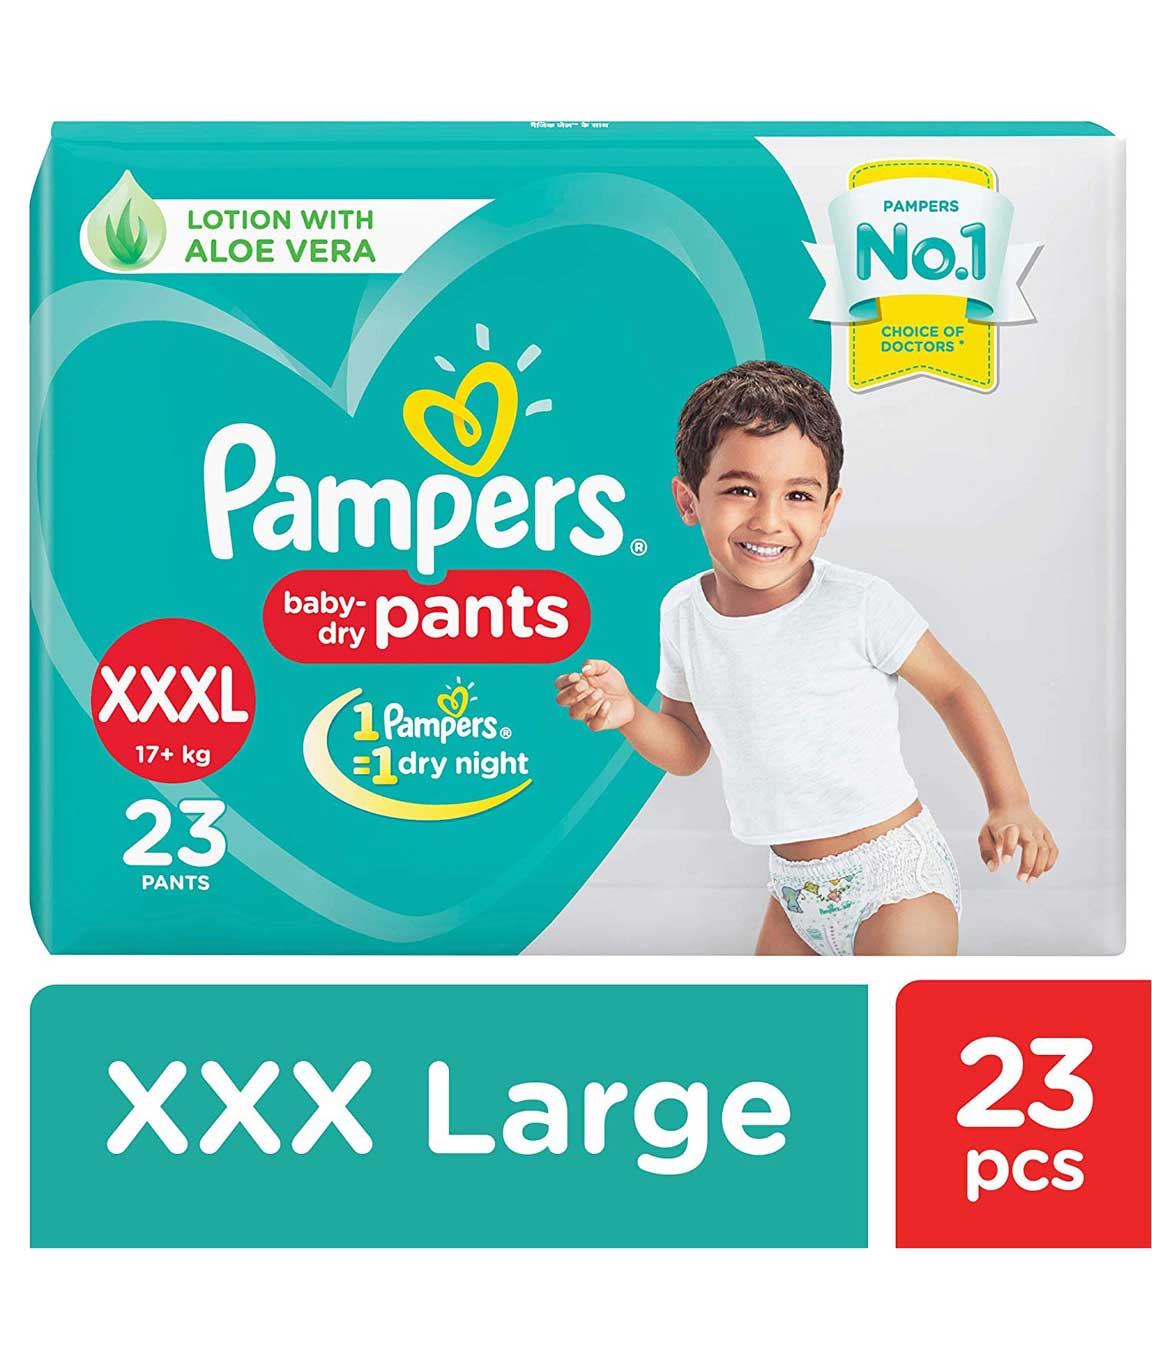 https://www.manthanonline.in/uploadImages/productimage/pampers-new-diaper-pants-xxx-large-23-count--5555.jpg